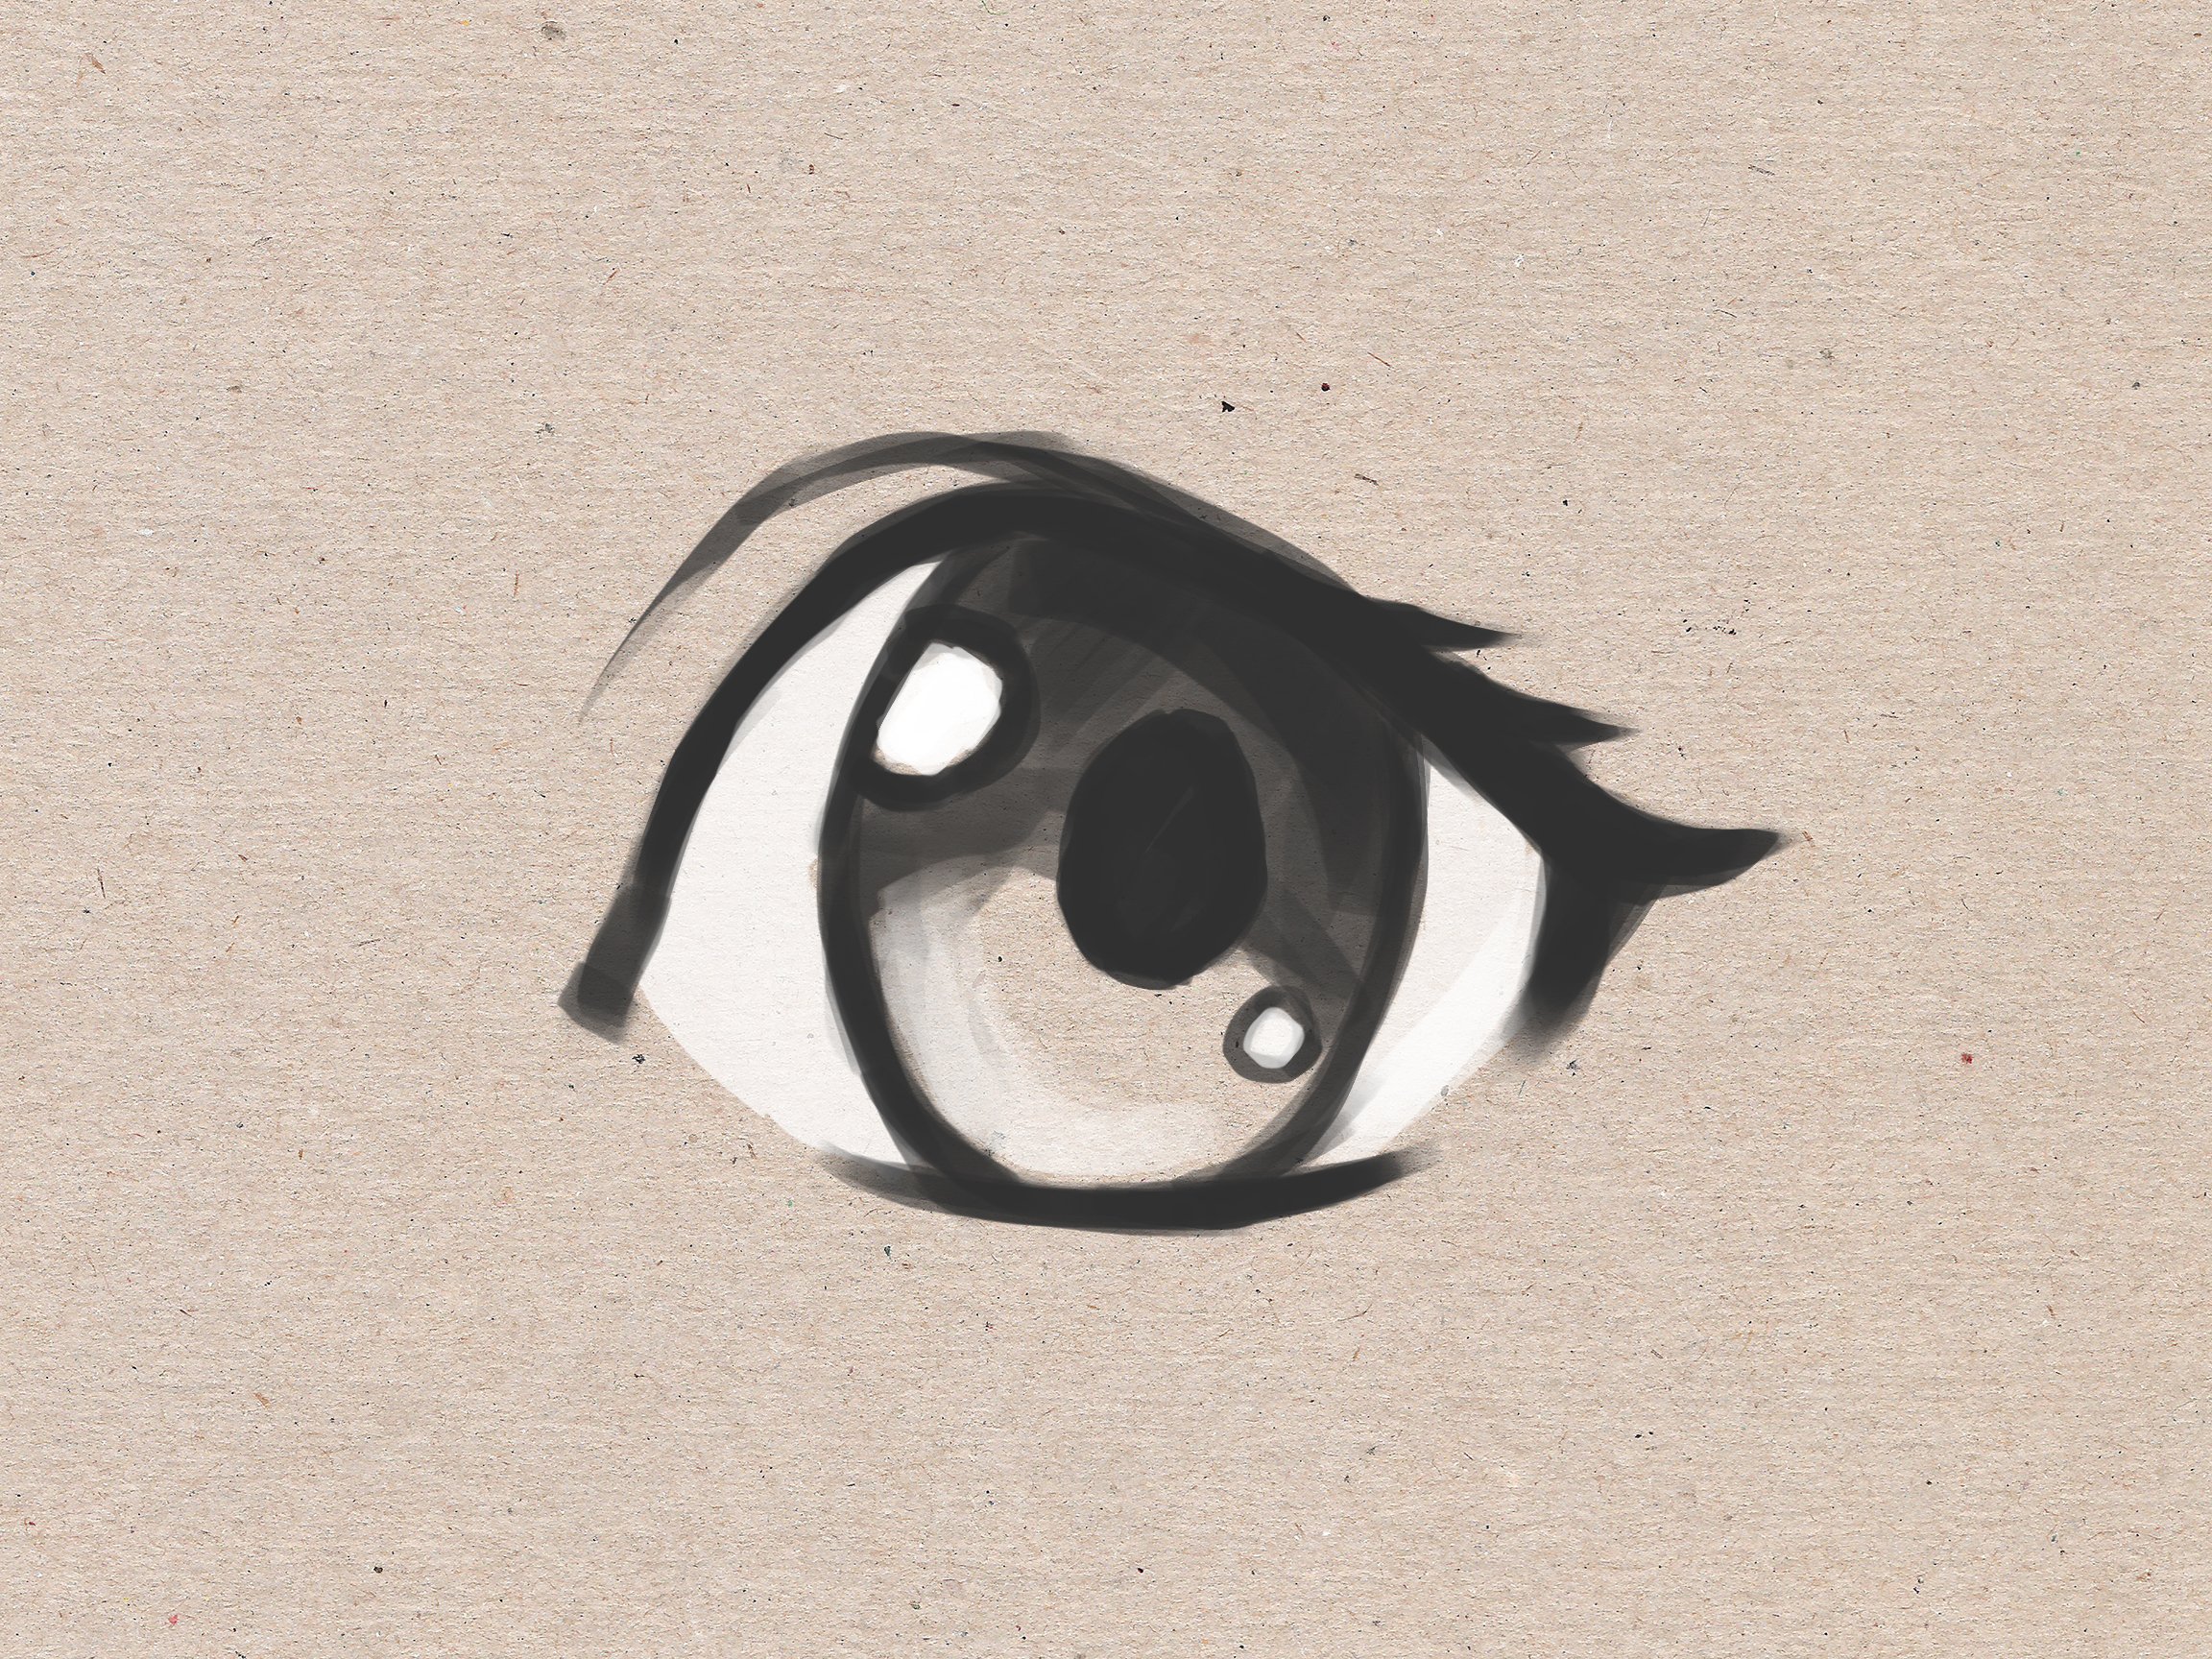 How to Draw Simple Anime Eyes: 5 Steps (with Pictures ...